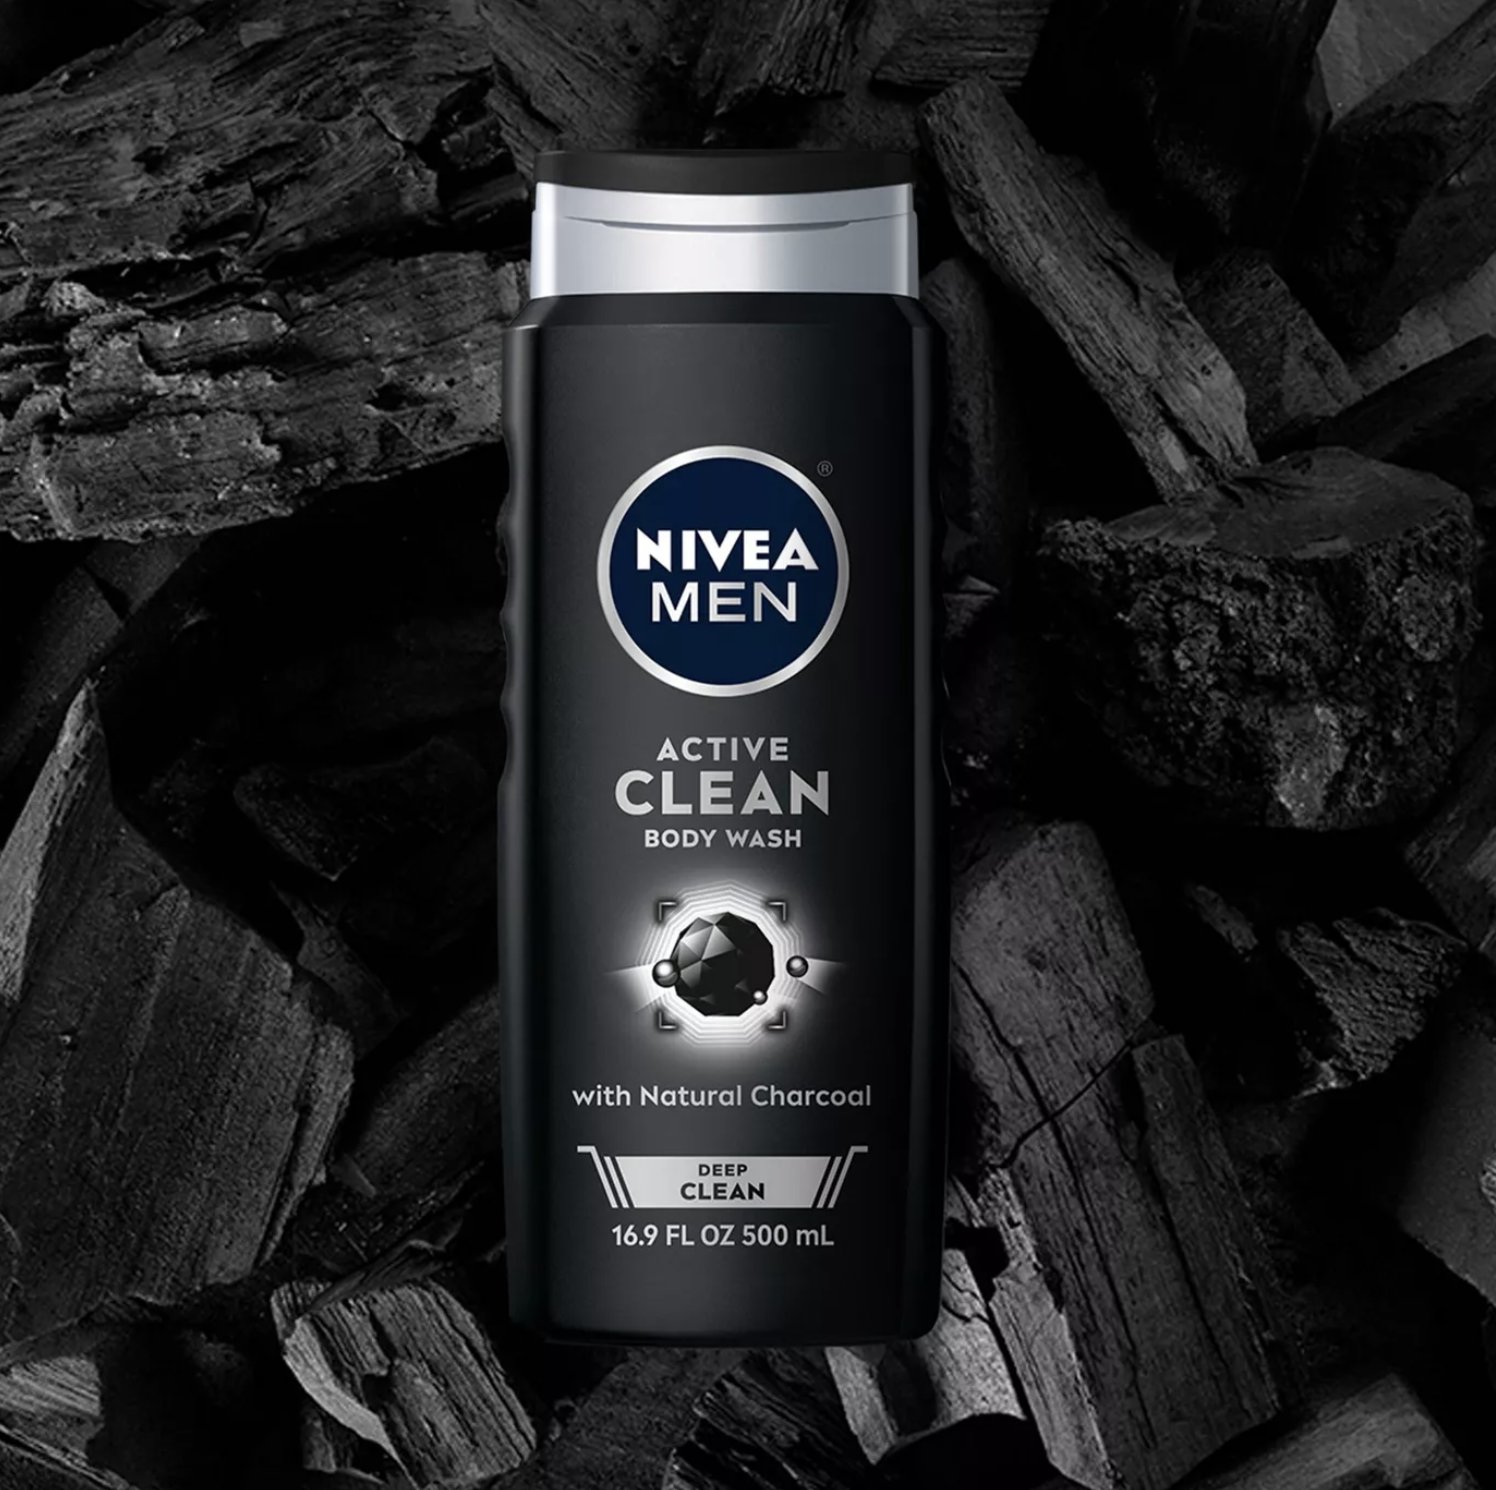 the body wash against a charcoal background